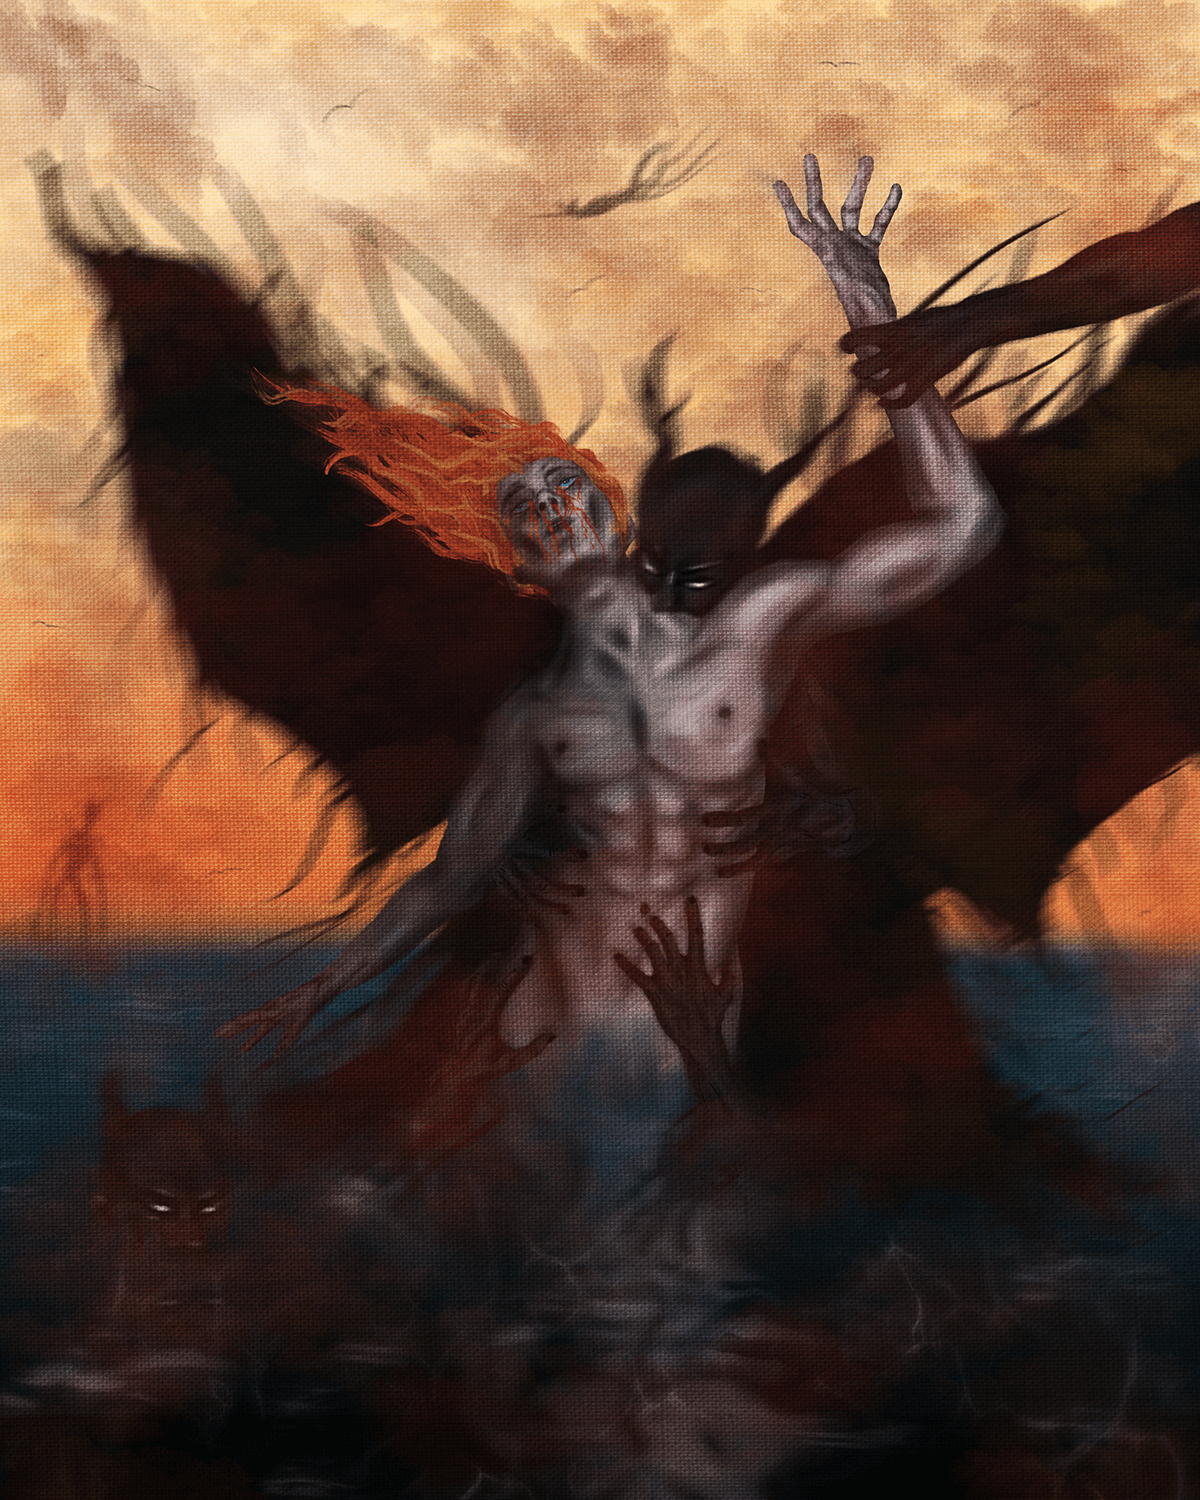 A surreal and dark digital painting with a man getting tormented by demons.